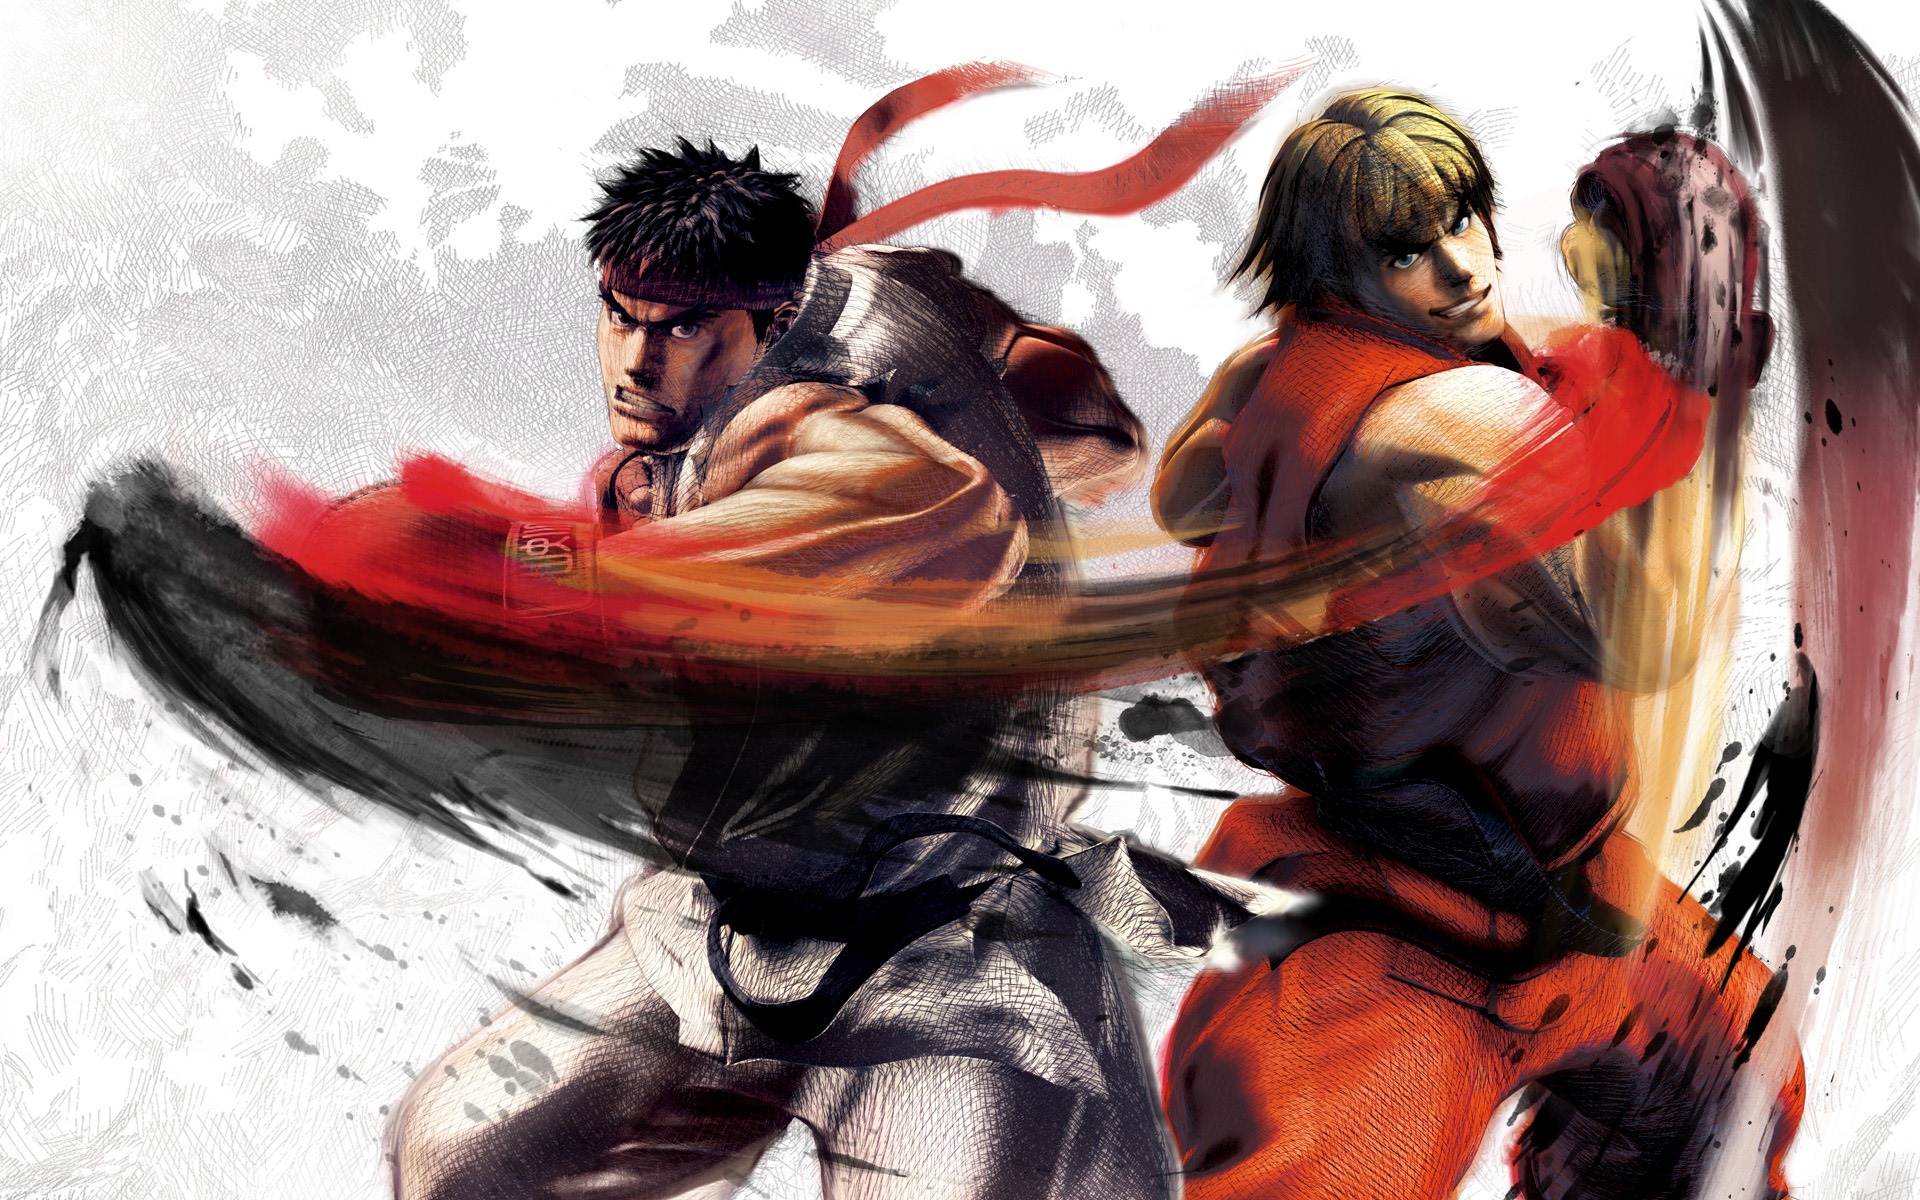 Download Free Modern Street Fighter HD The Wallpapers 1920x1080px